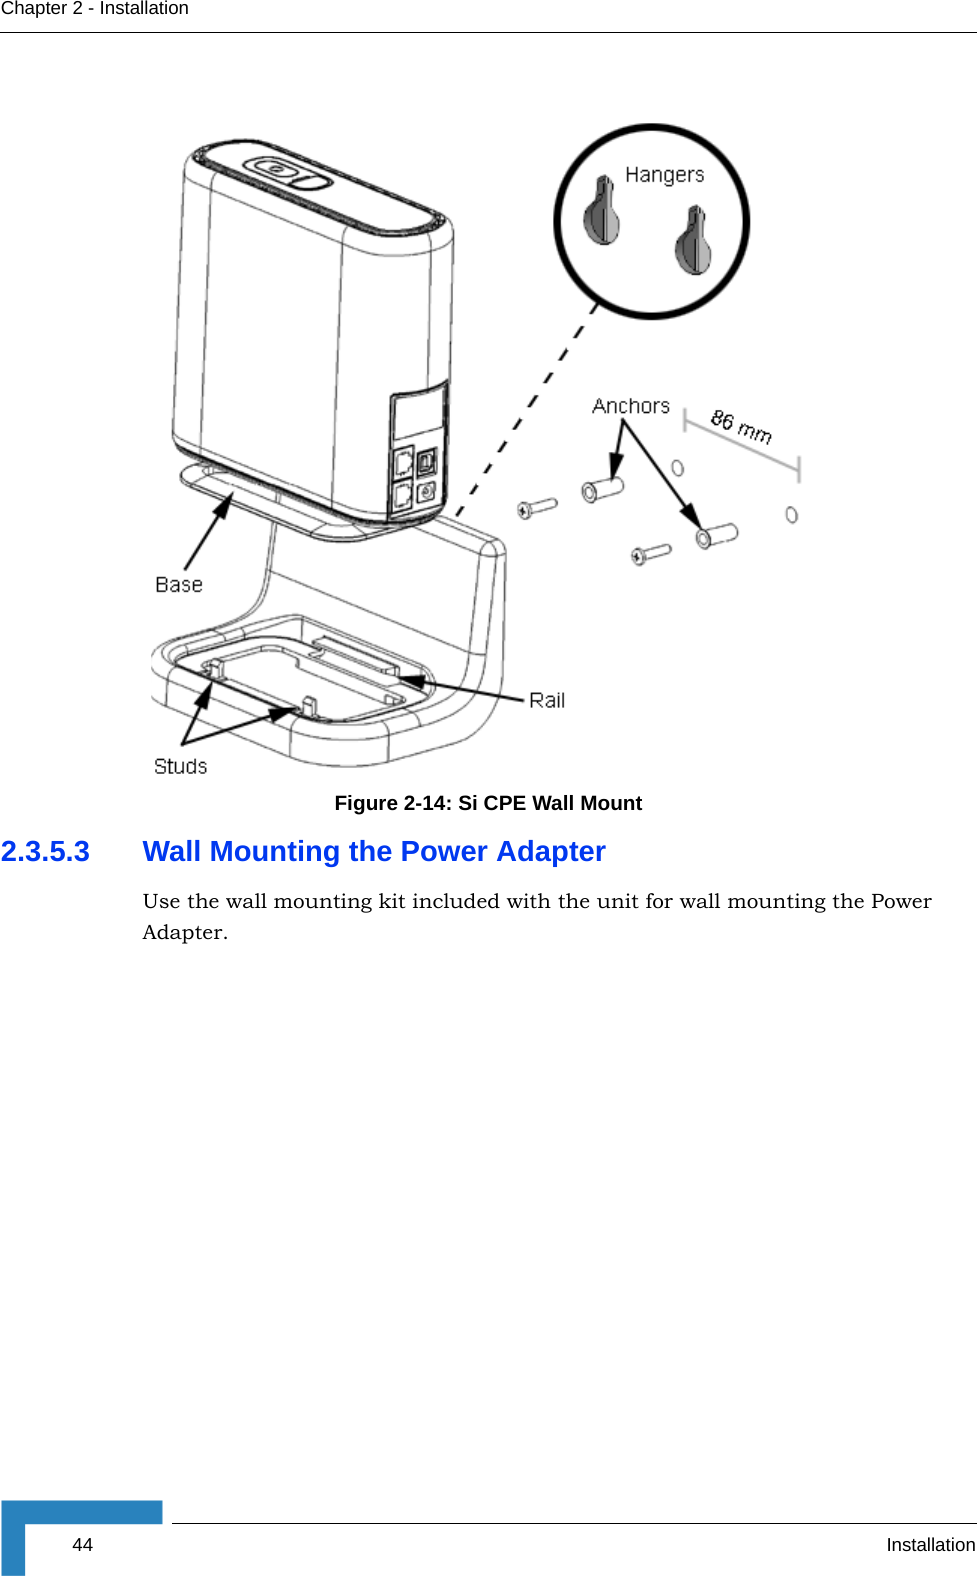 44 InstallationChapter 2 - Installation2.3.5.3 Wall Mounting the Power AdapterUse the wall mounting kit included with the unit for wall mounting the Power Adapter.Figure 2-14: Si CPE Wall Mount